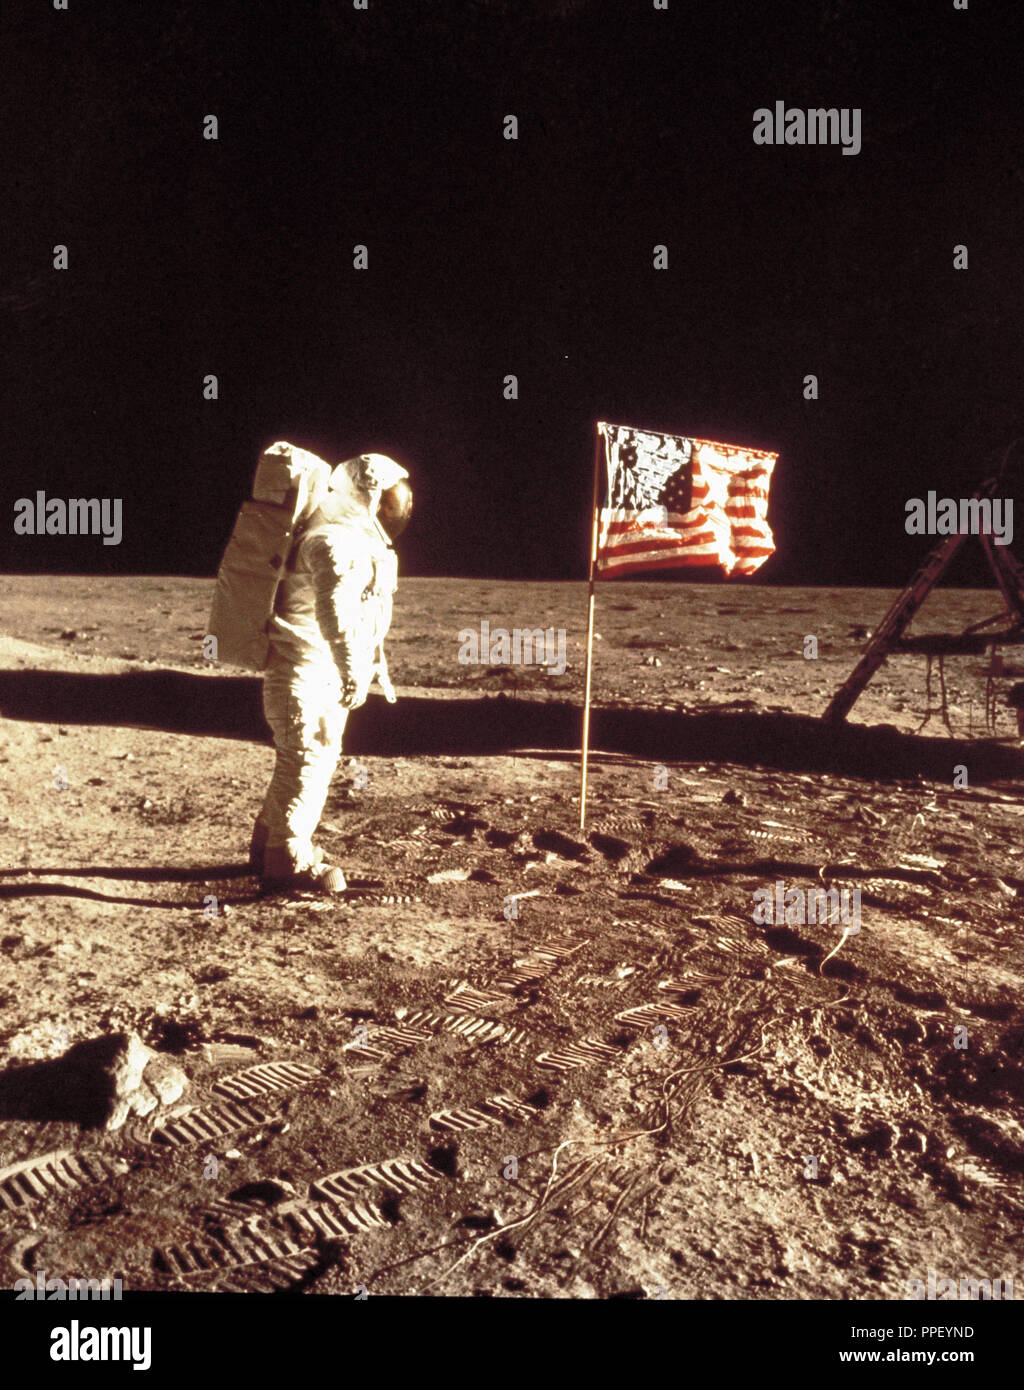 Astronaut Edward Aldrin poses beside deployed US flag. The lunar module is on the left. The astronaut's footprints are clearly visible in the foreground. Stock Photo